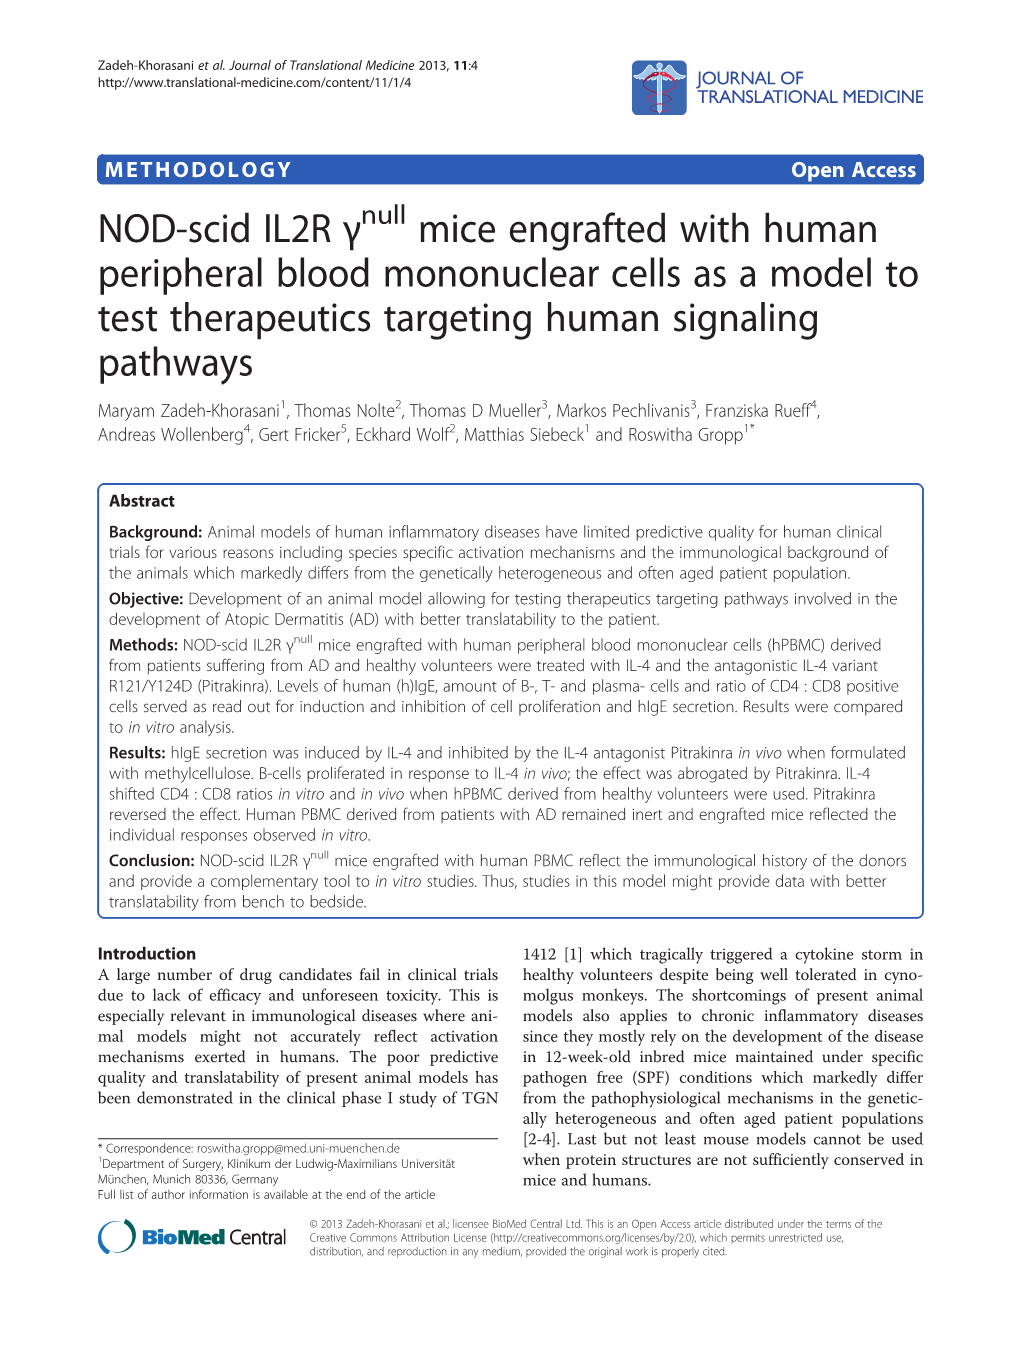 NOD-Scid IL2R Γ Mice Engrafted with Human Peripheral Blood